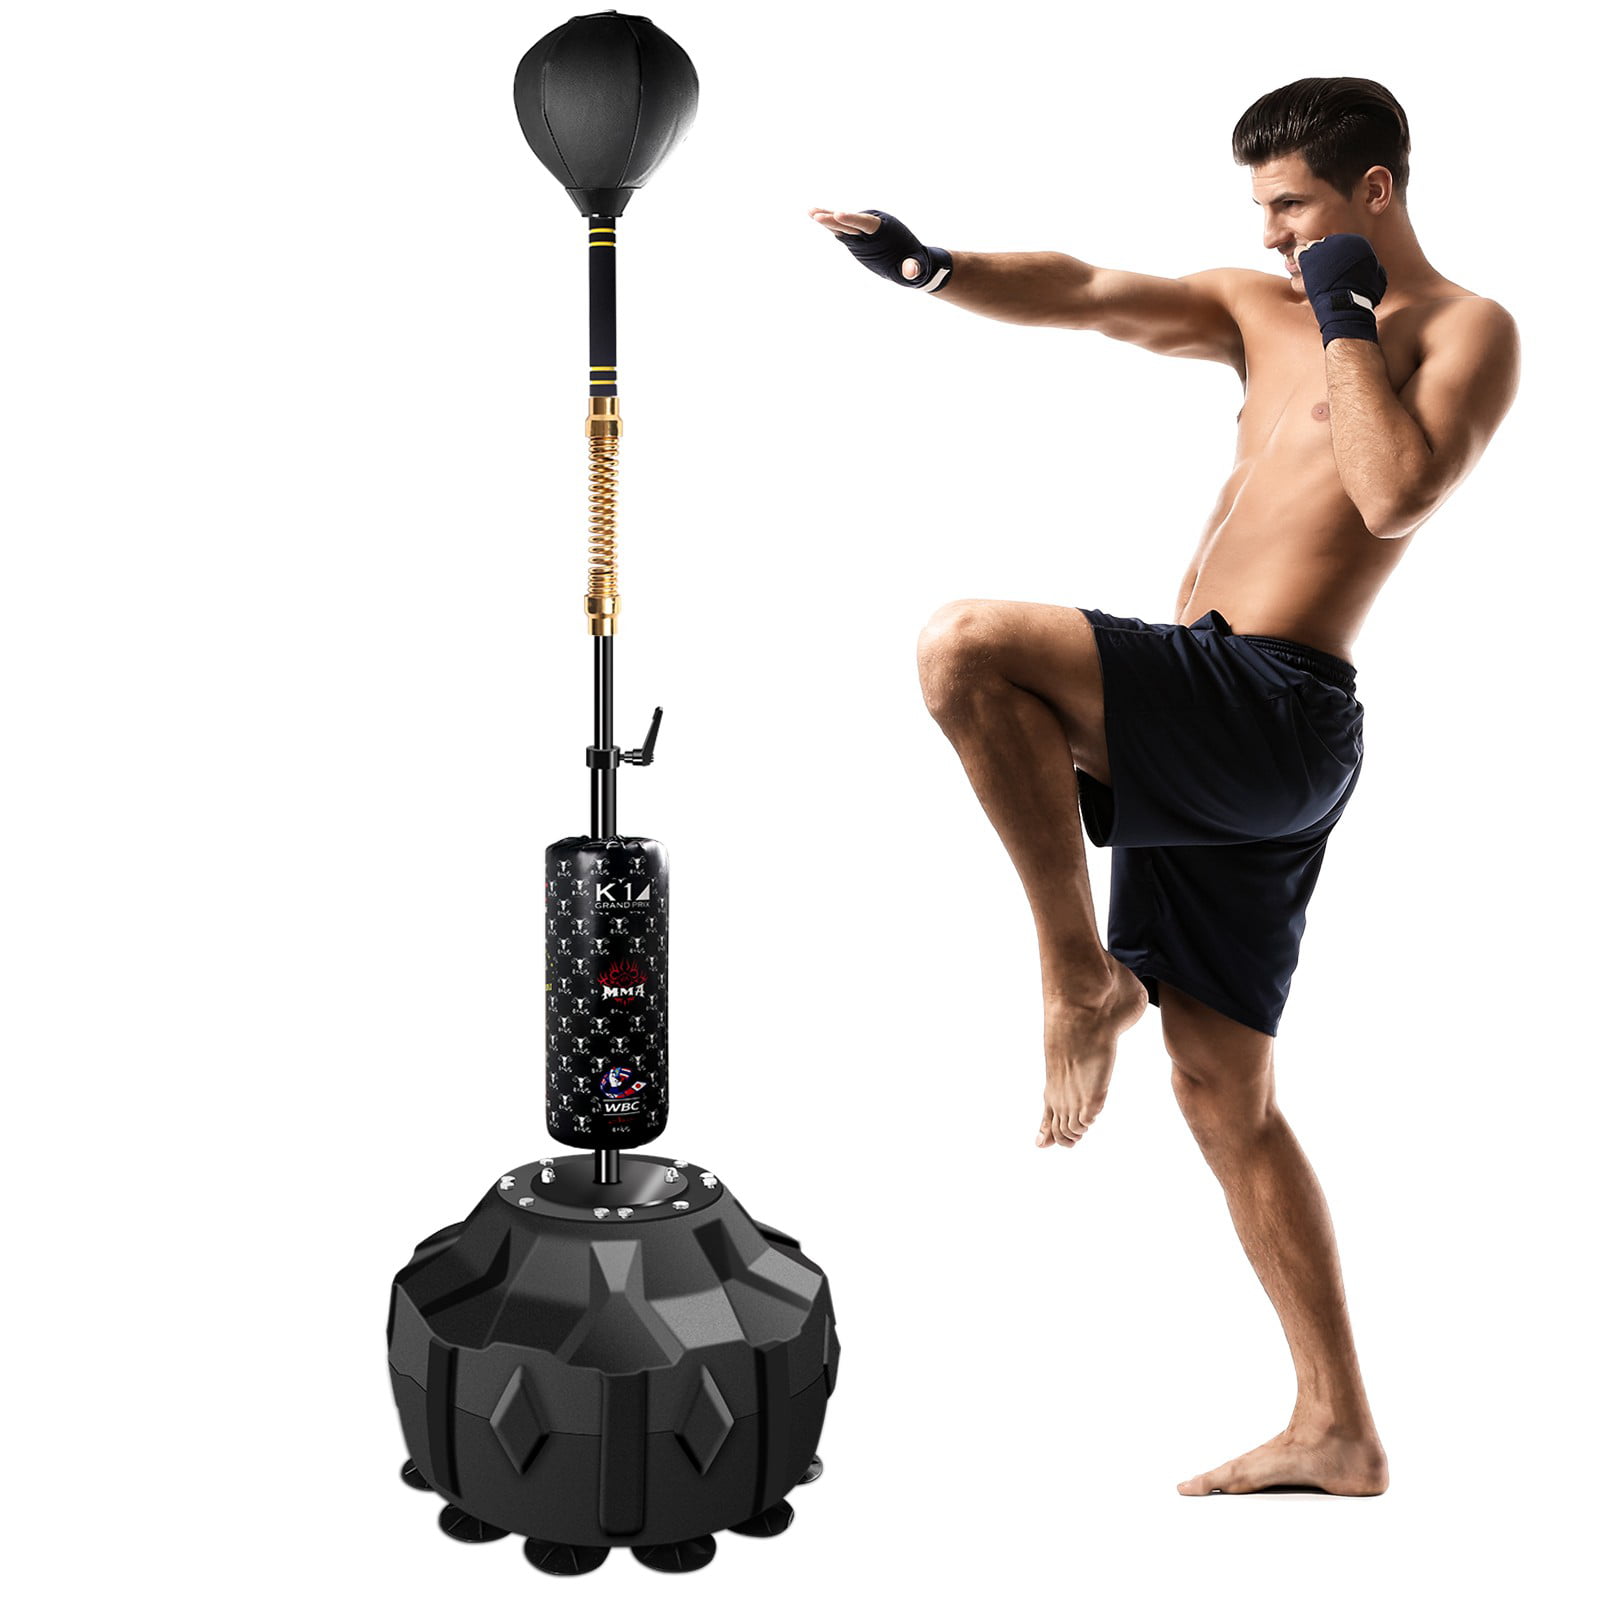 Details about   Punching Bag Freestanding Fitness Boxing Bag Reflex Speed Ball for Kids & Adults 